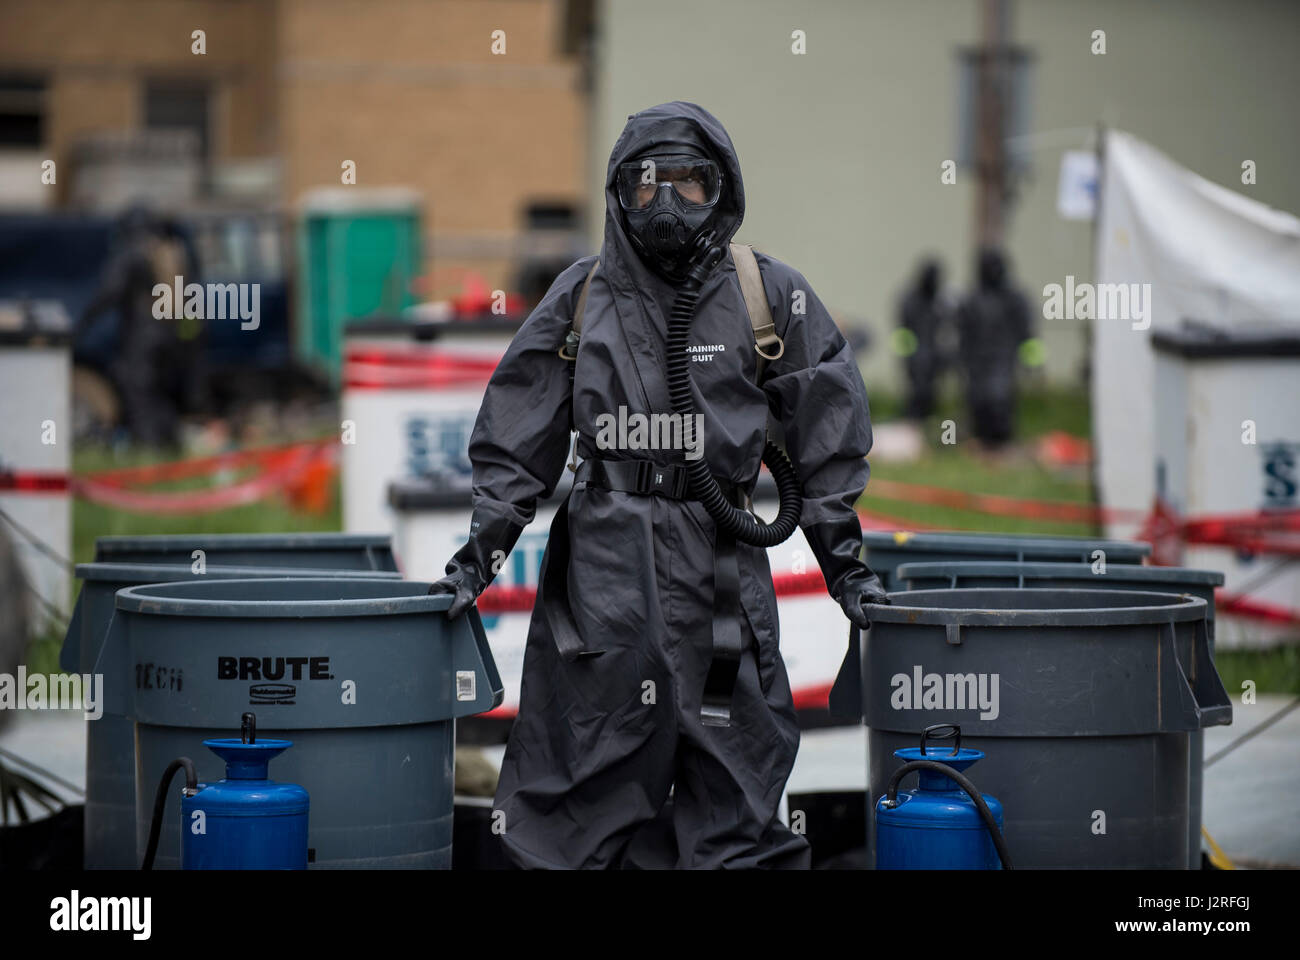 A U.S. Army Soldier with the 51st Chemical Biological Radiological Nuclear Company, of Fort Stewart, Georgia, stands watch at a decontamination field site during Guardian Response 17 at the Muscatatuck Urban Training Center, Indiana, April 27, 2017. Guardian Response, as part of Vibrant Response, is a multi-component training exercise run by the U.S. Army Reserve designed to validate nearly 4,000 service members in Defense Support of Civil Authorities (DSCA) in the event of a Chemical, Biological, Radiological and Nuclear (CBRN) catastrophe. This year's exercise simulated an improvised nuclear Stock Photo